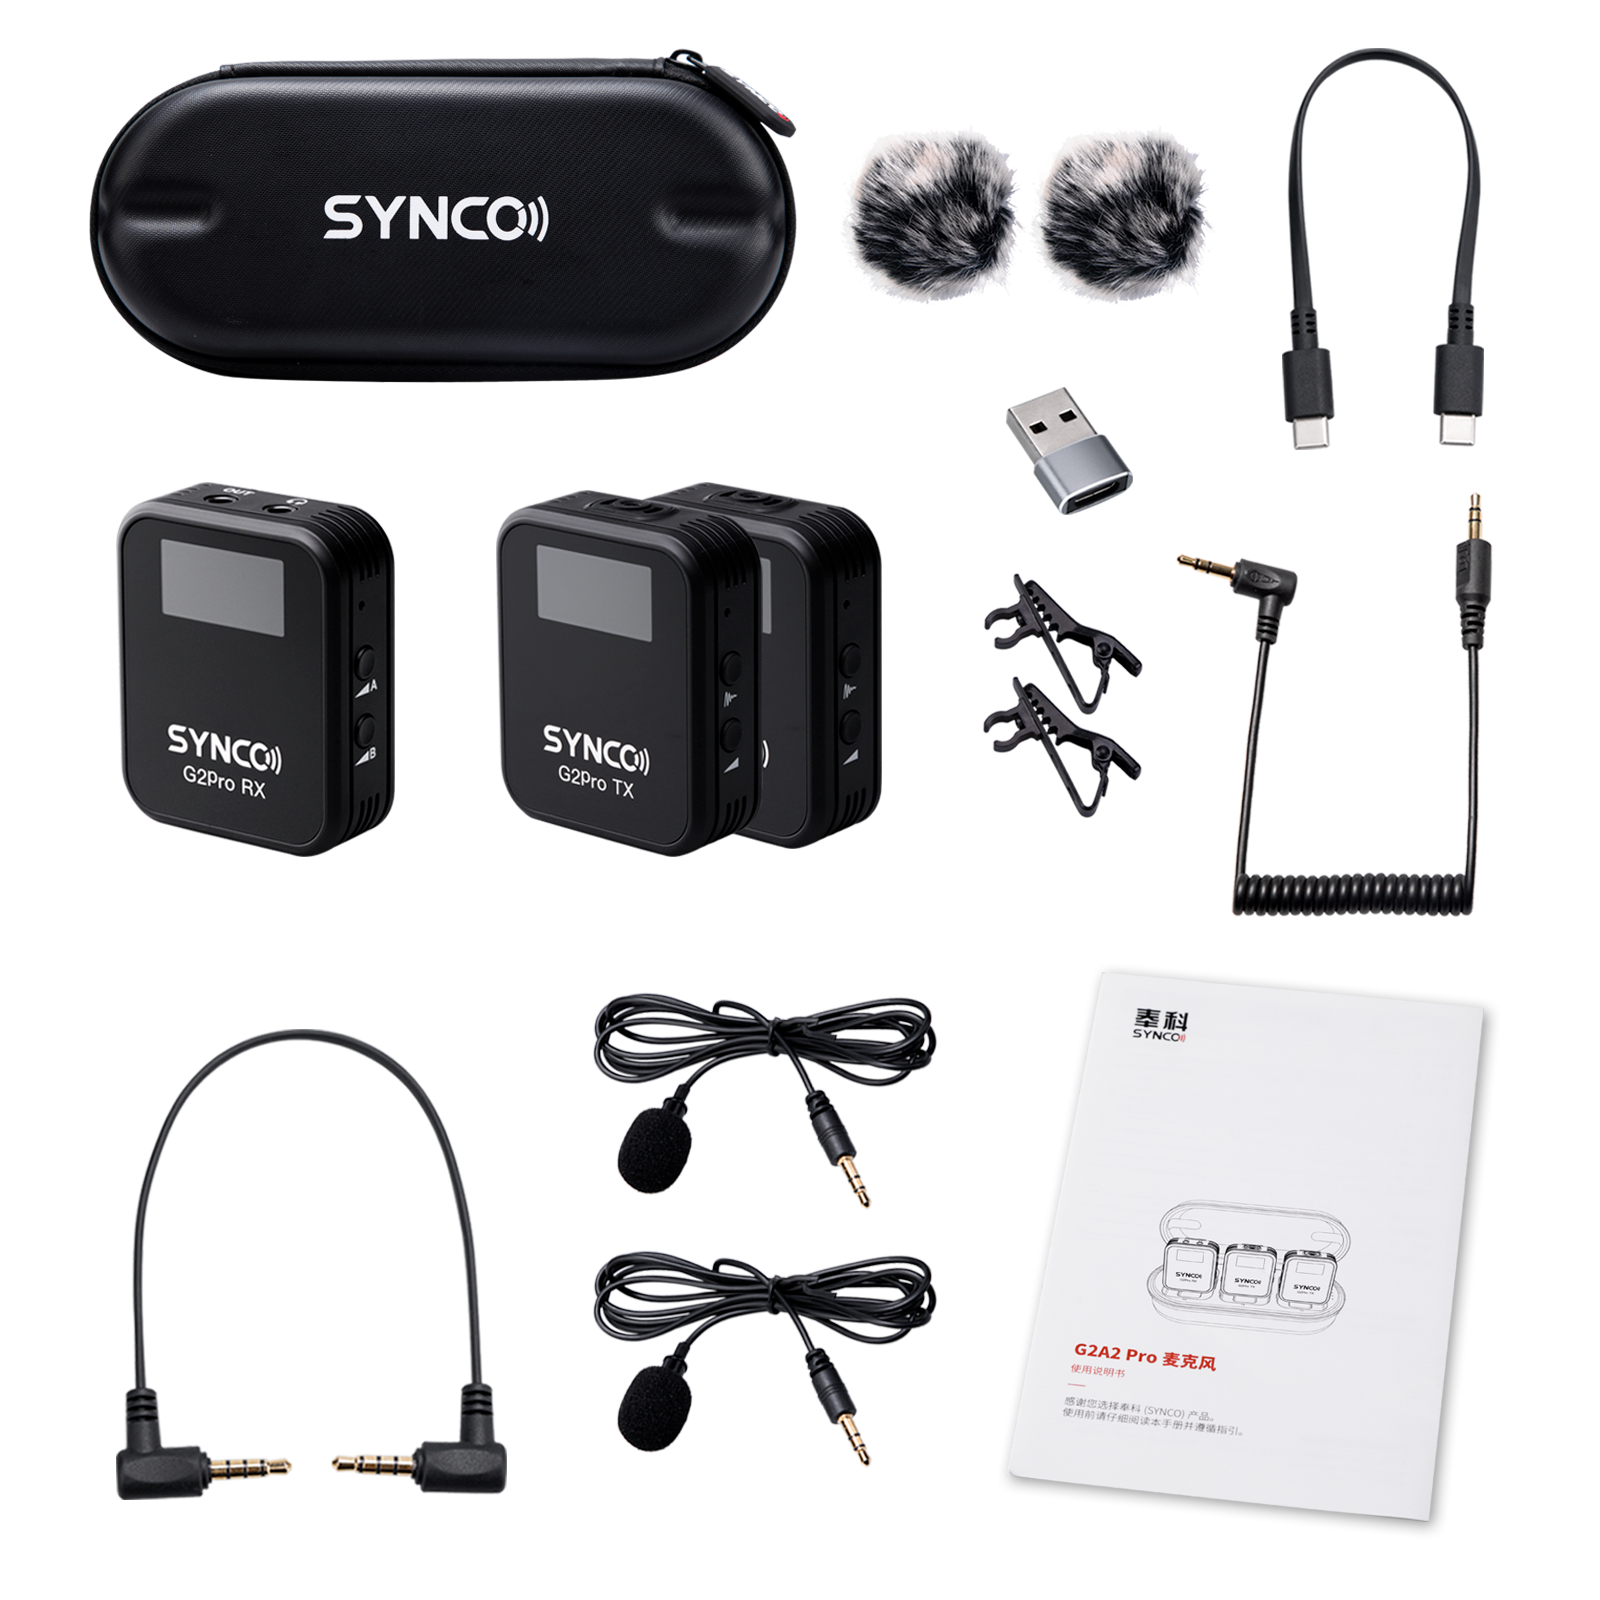 SYNCO G2(A2) Pro 2.4G Dual Lapel Mic Digital Wireless Lavalier Microphone with 2 TXs